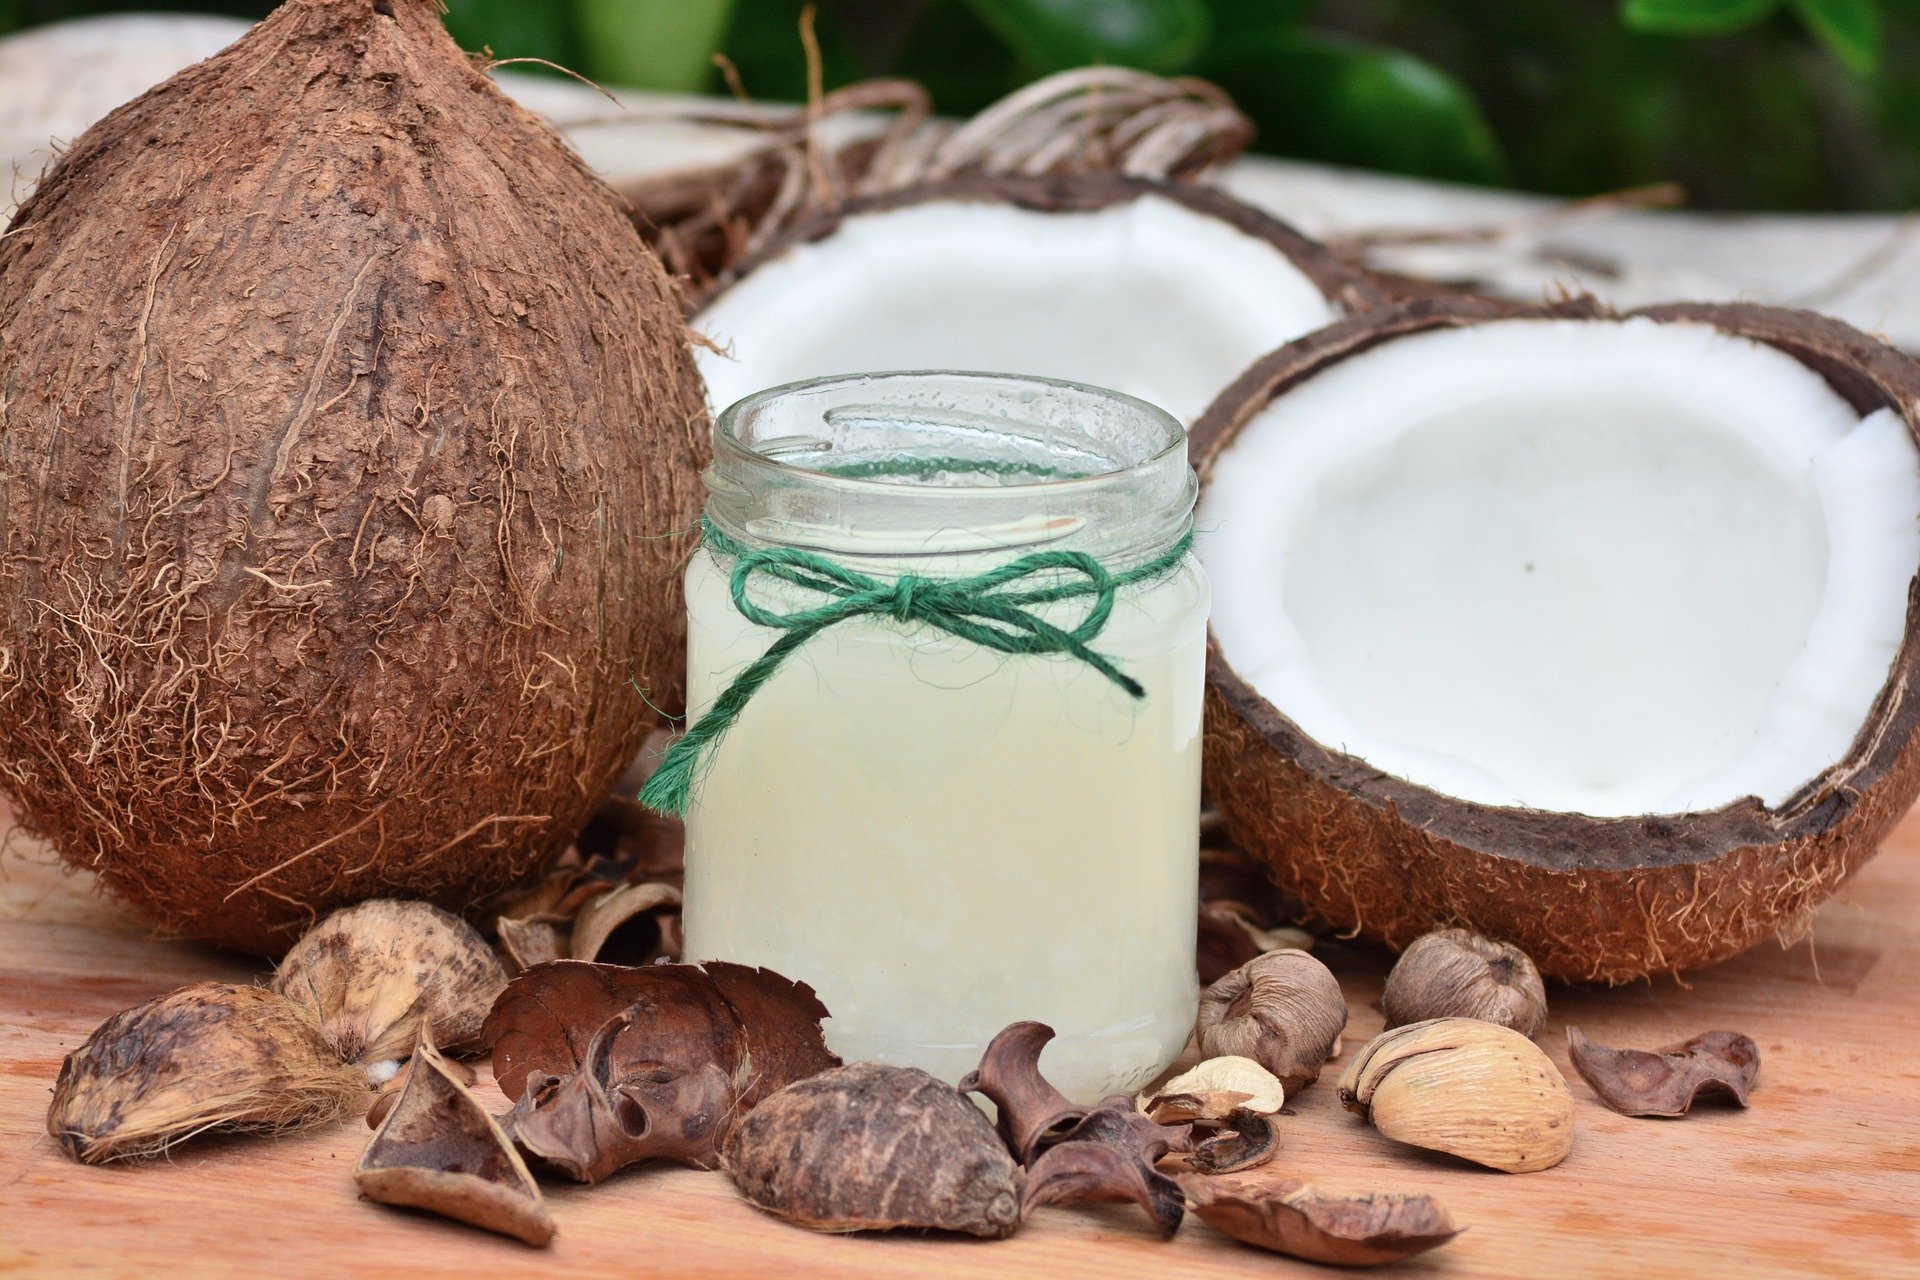 30 Science-Backed Health Benefits of Coconut and Coconut Oil